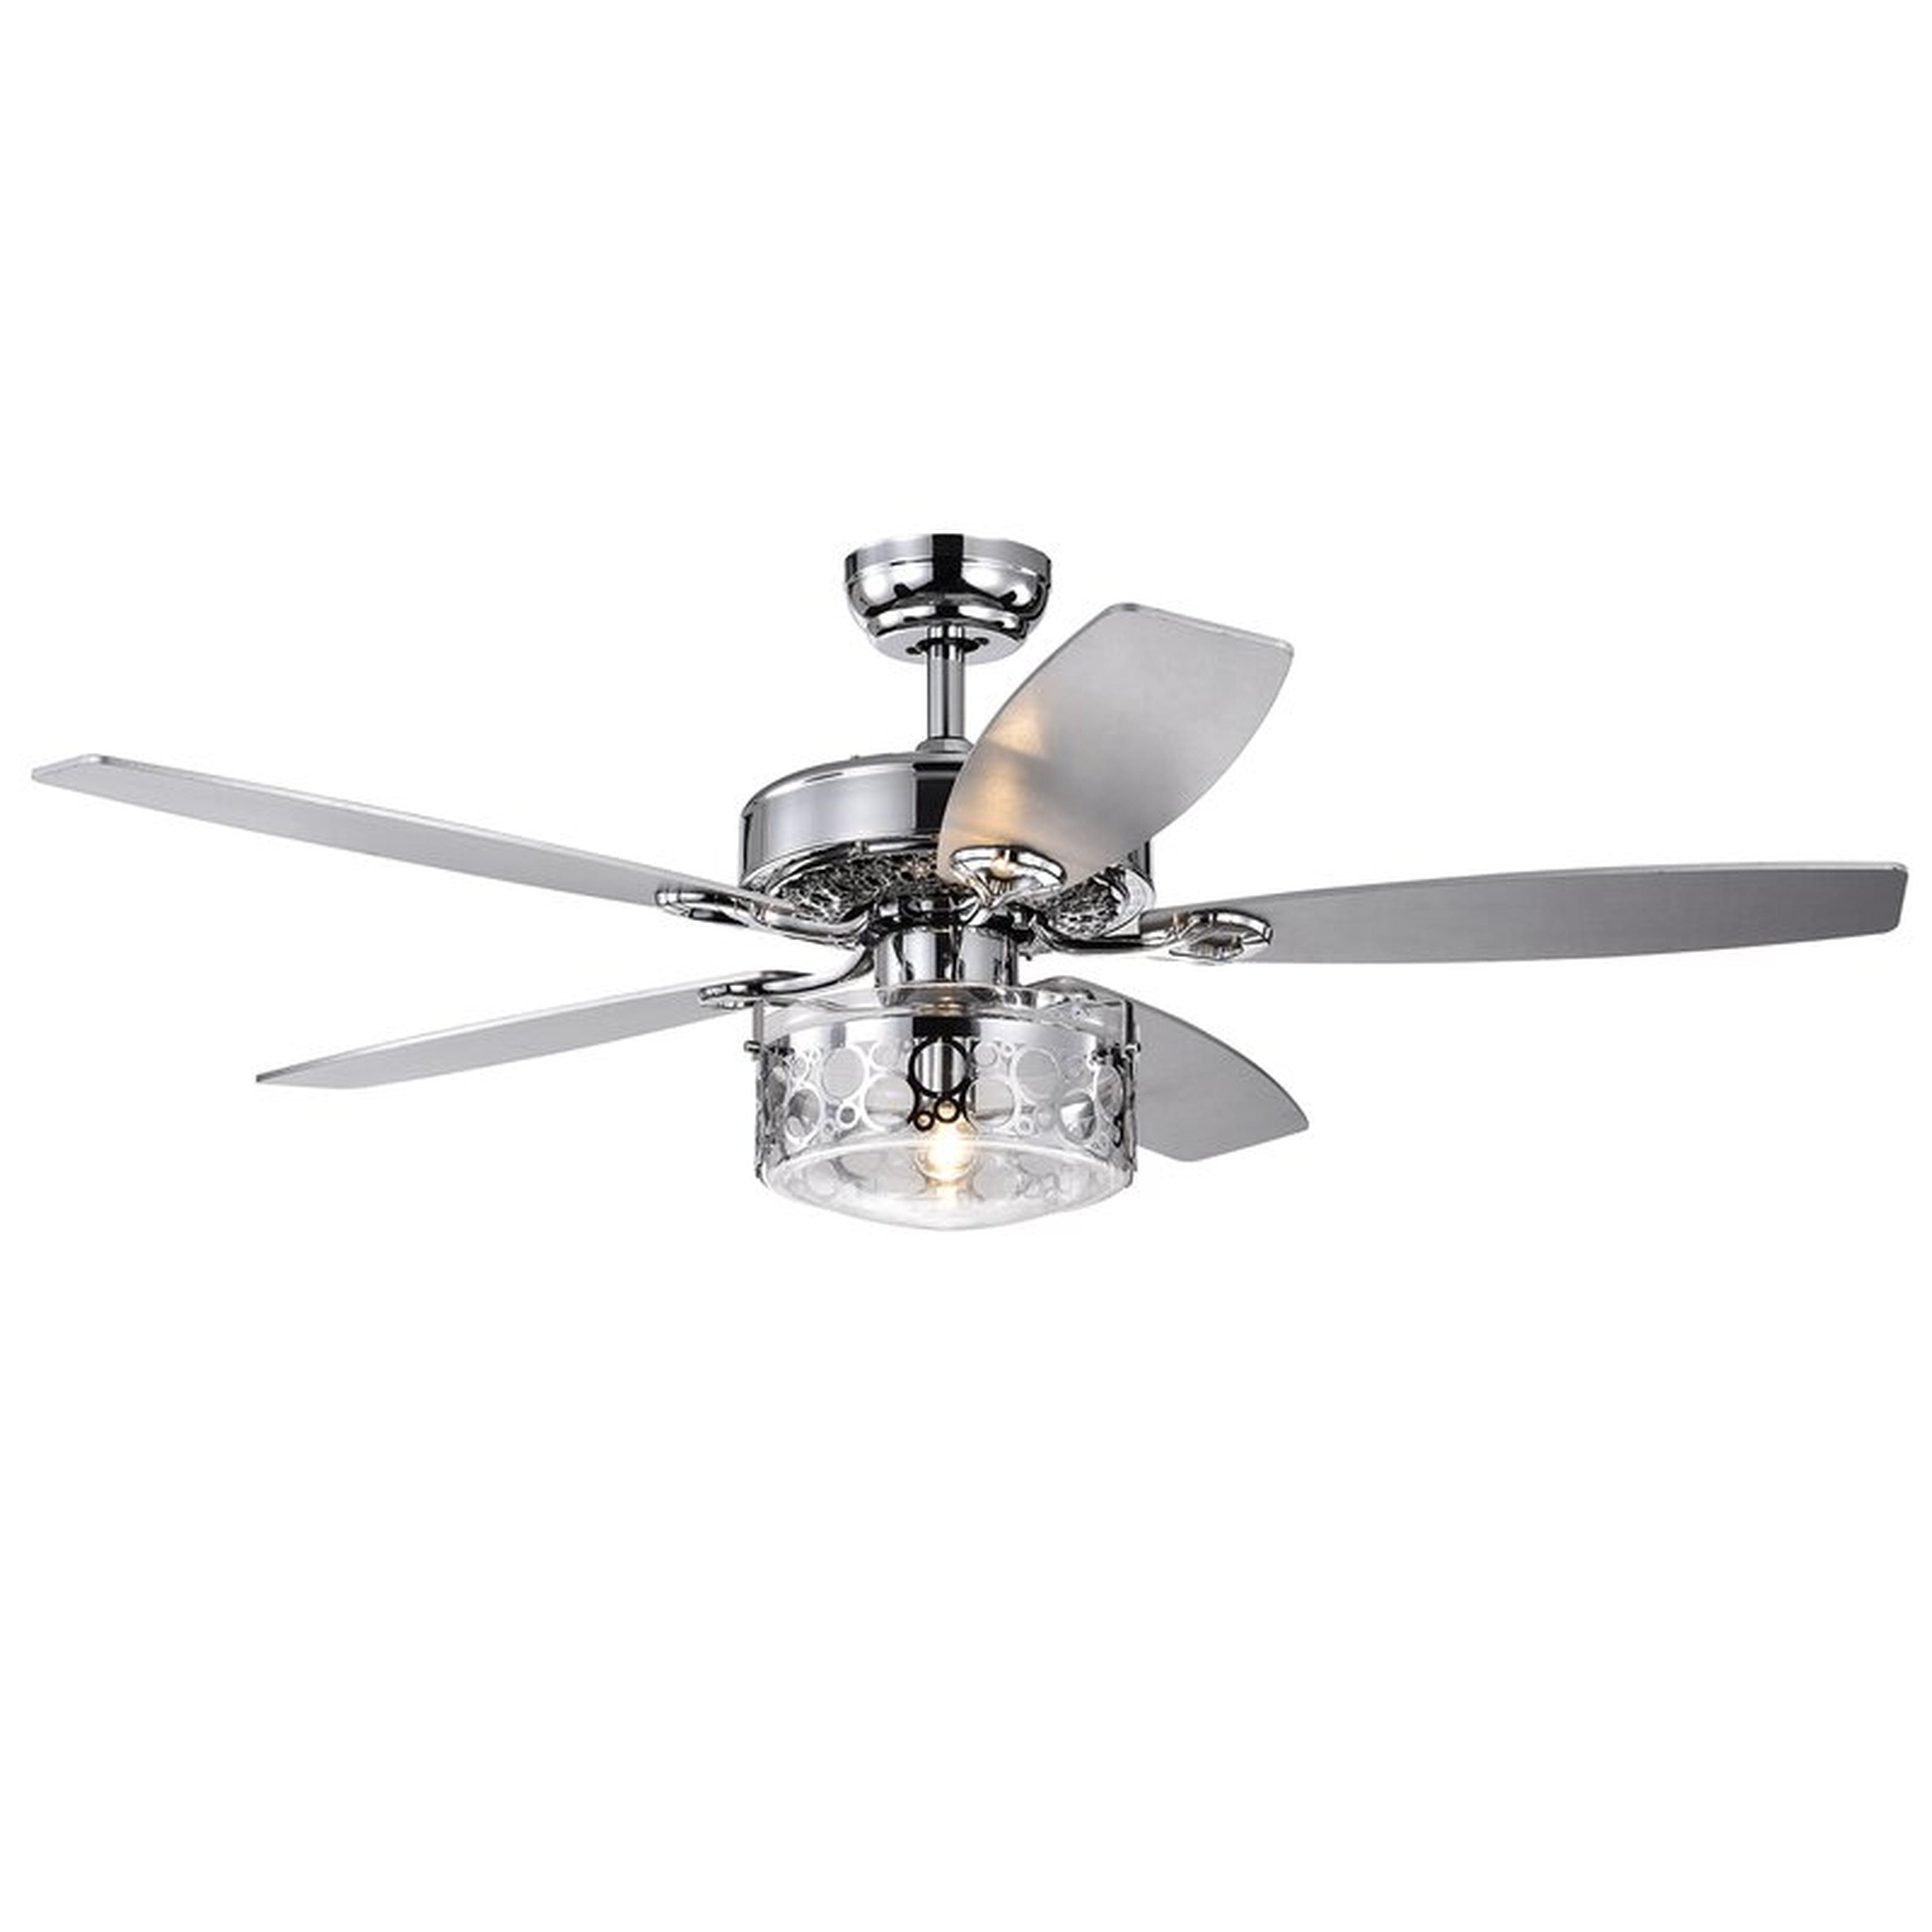 52" Beebe 5 Blade Ceiling Fan with Remote, Light Kit Included - Wayfair